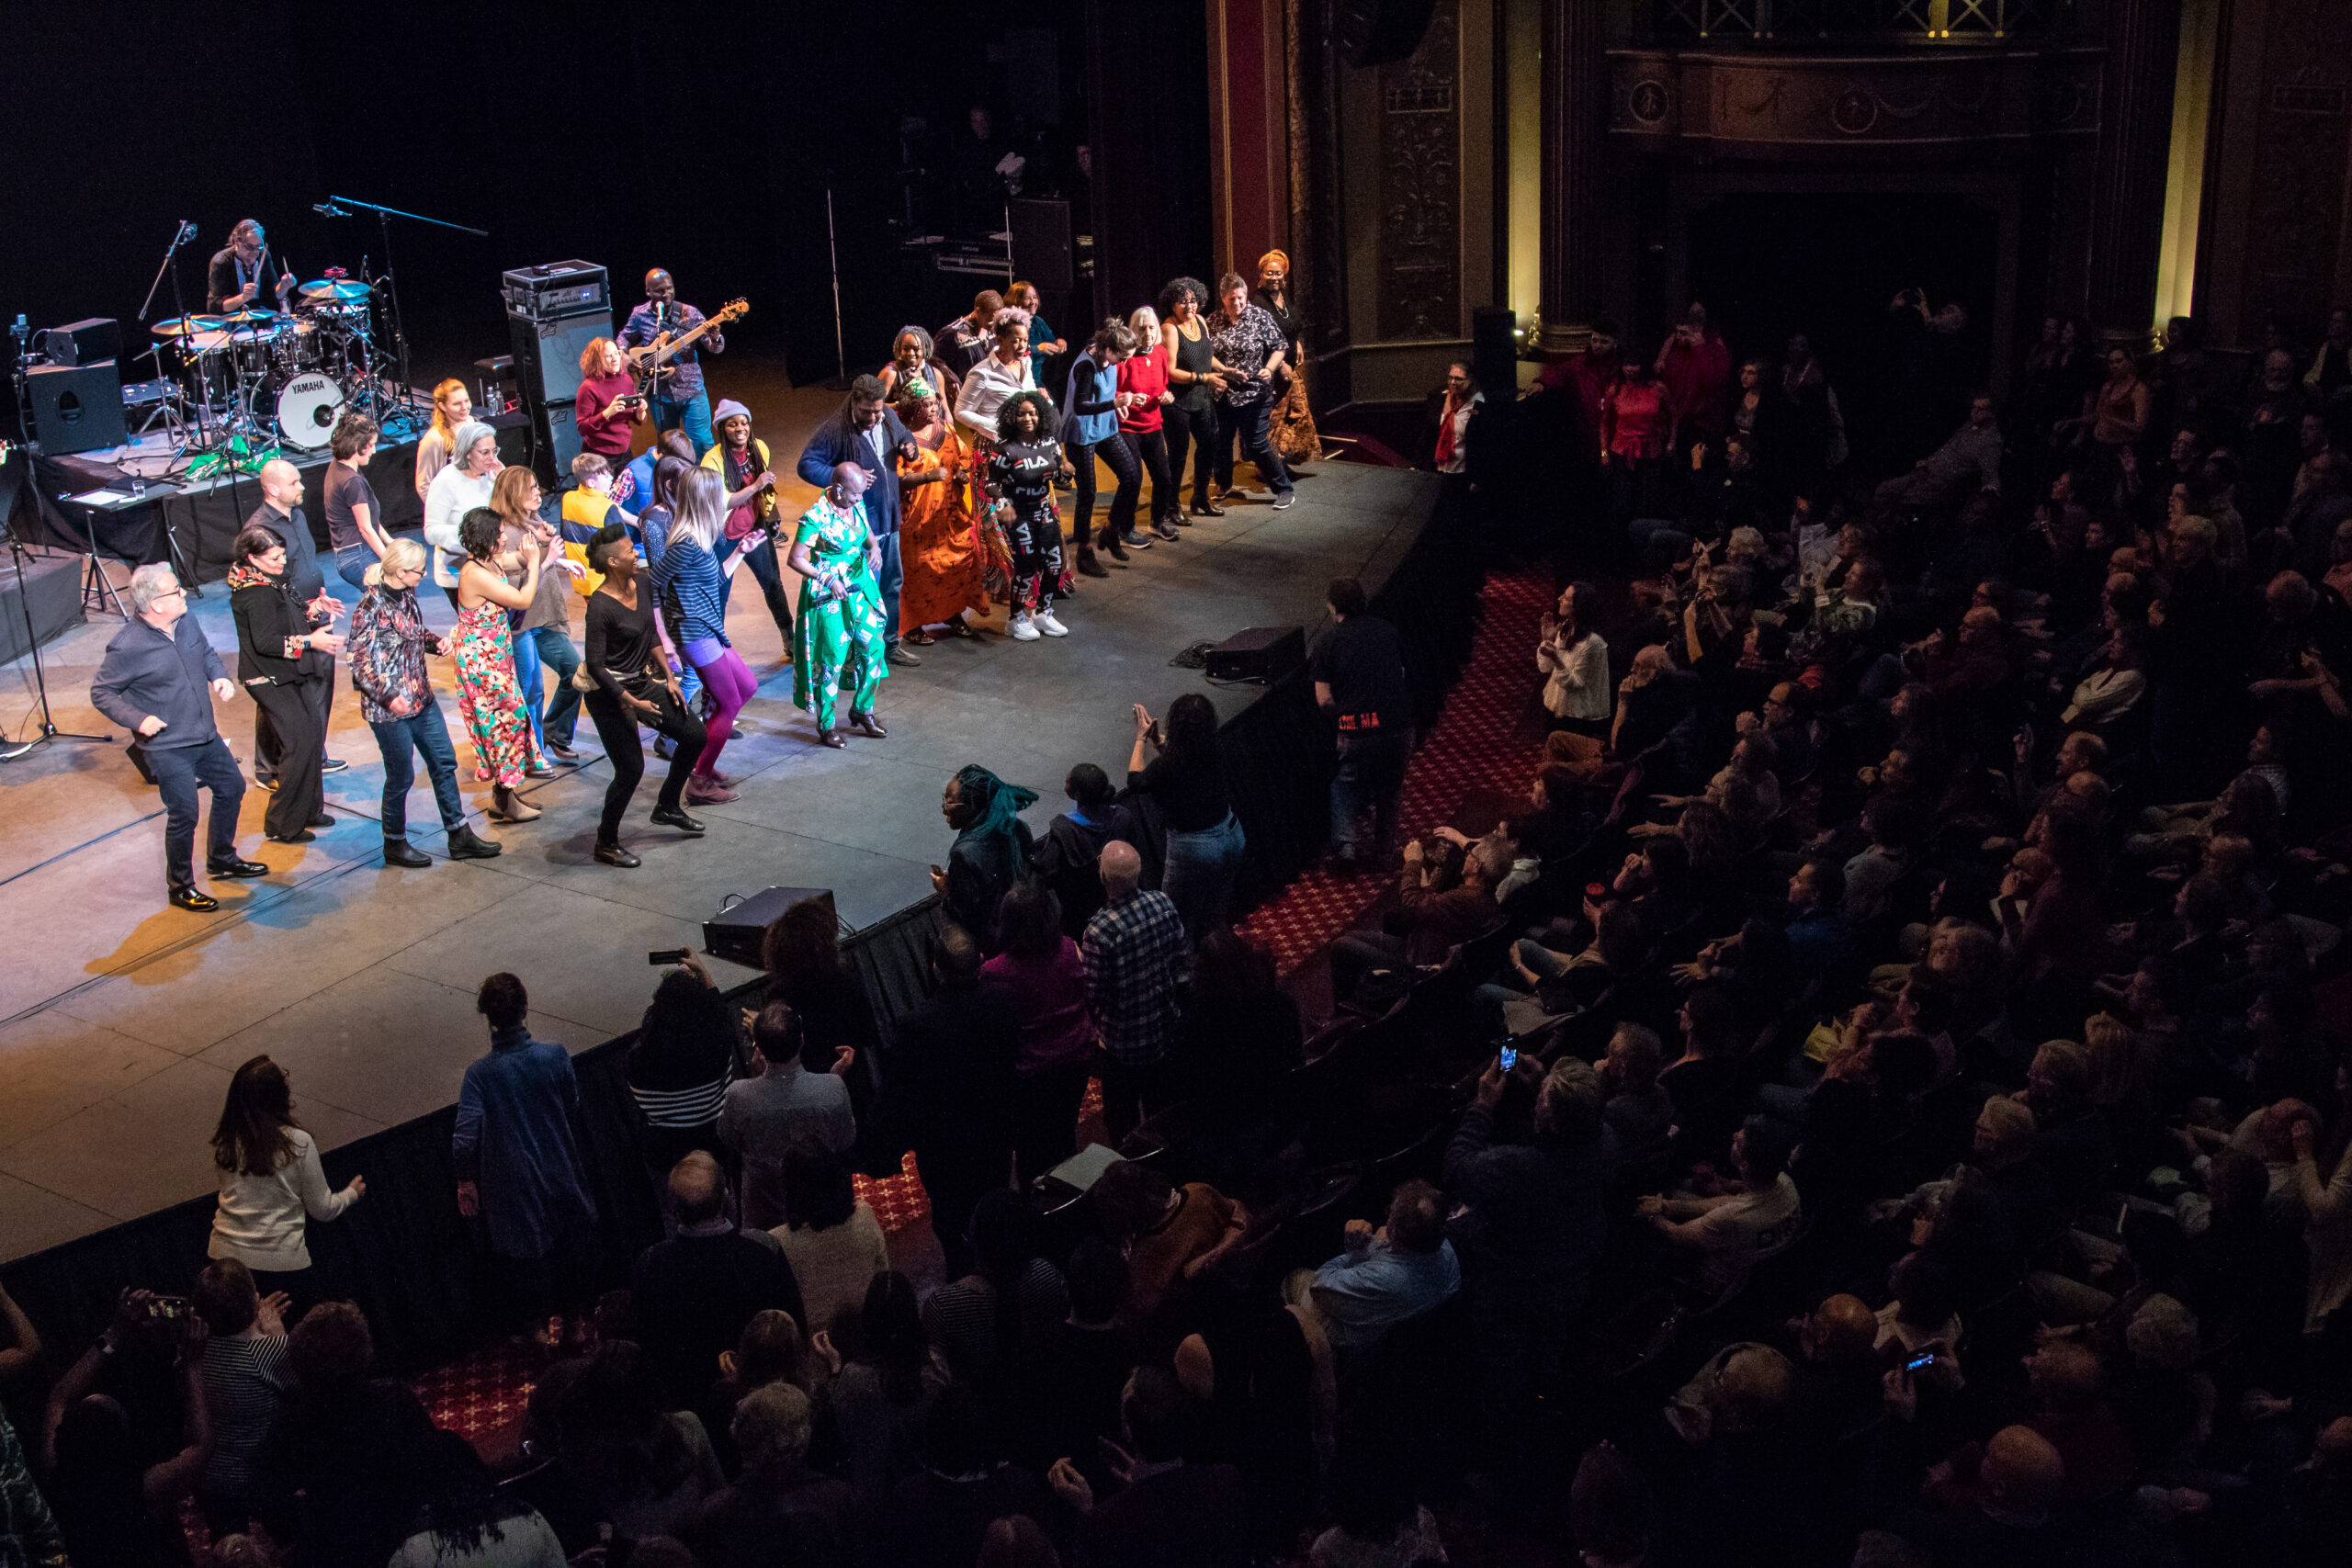 Audience members dance with Angélique Kidjo on stage at The VETS in February 2020. The first seven rows of audience members are shown dancing along.